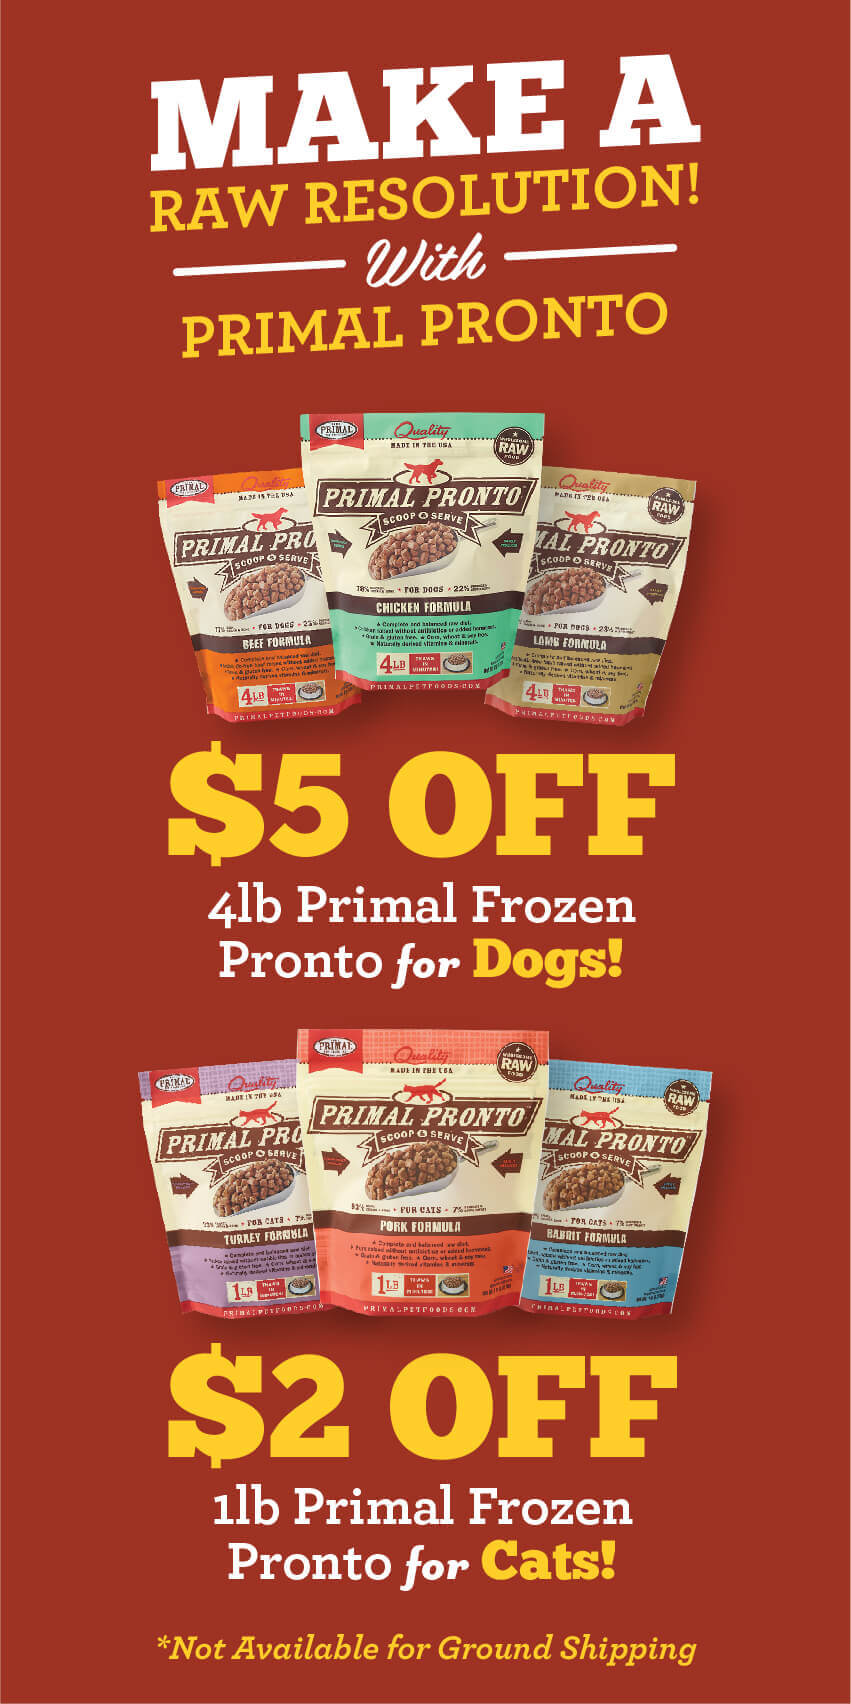 January Specials - Make a Raw Resolution with Primal Pronto